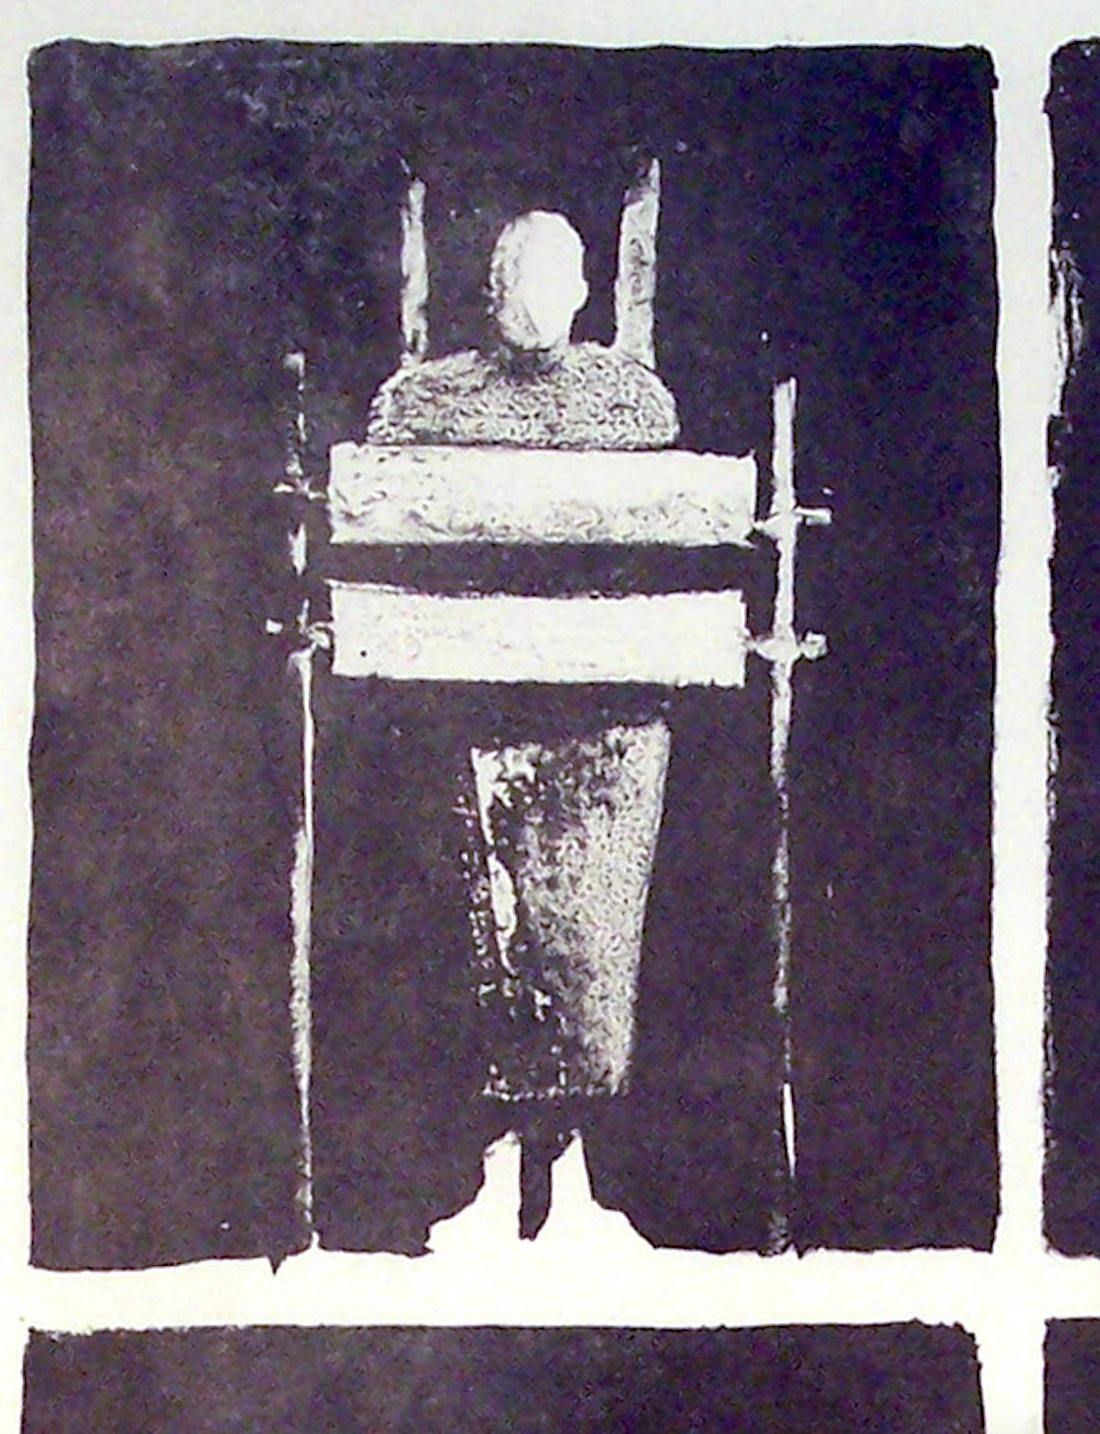 Etcher Four-Ways: Black and white lithograph - Abstract Art by Chaim Koppleman